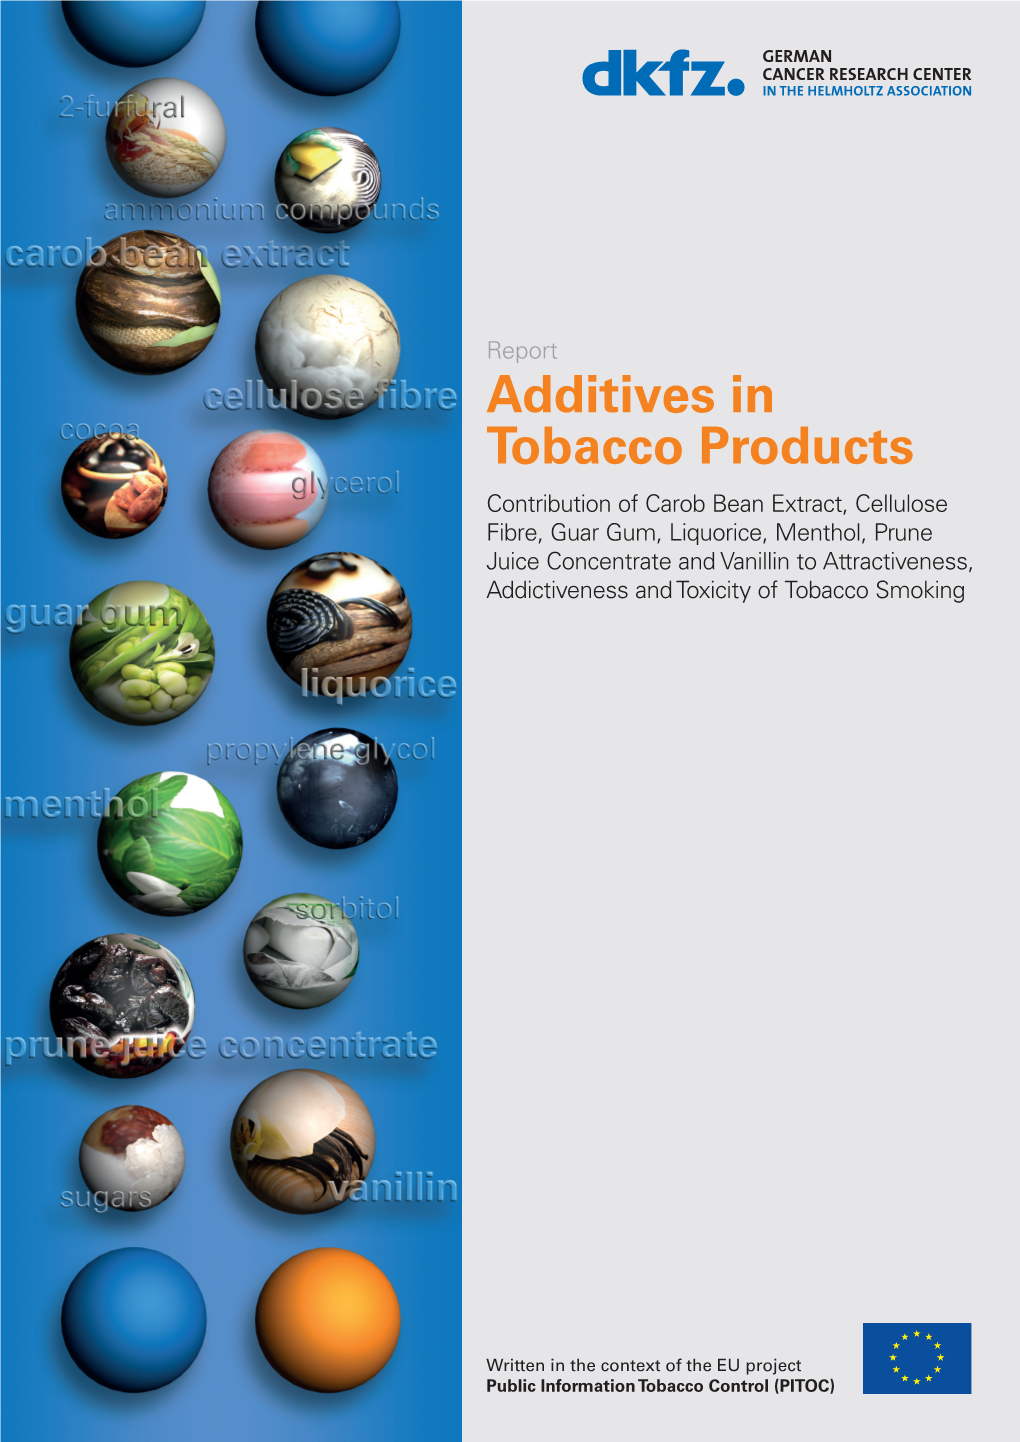 Additives in Tobacco Products